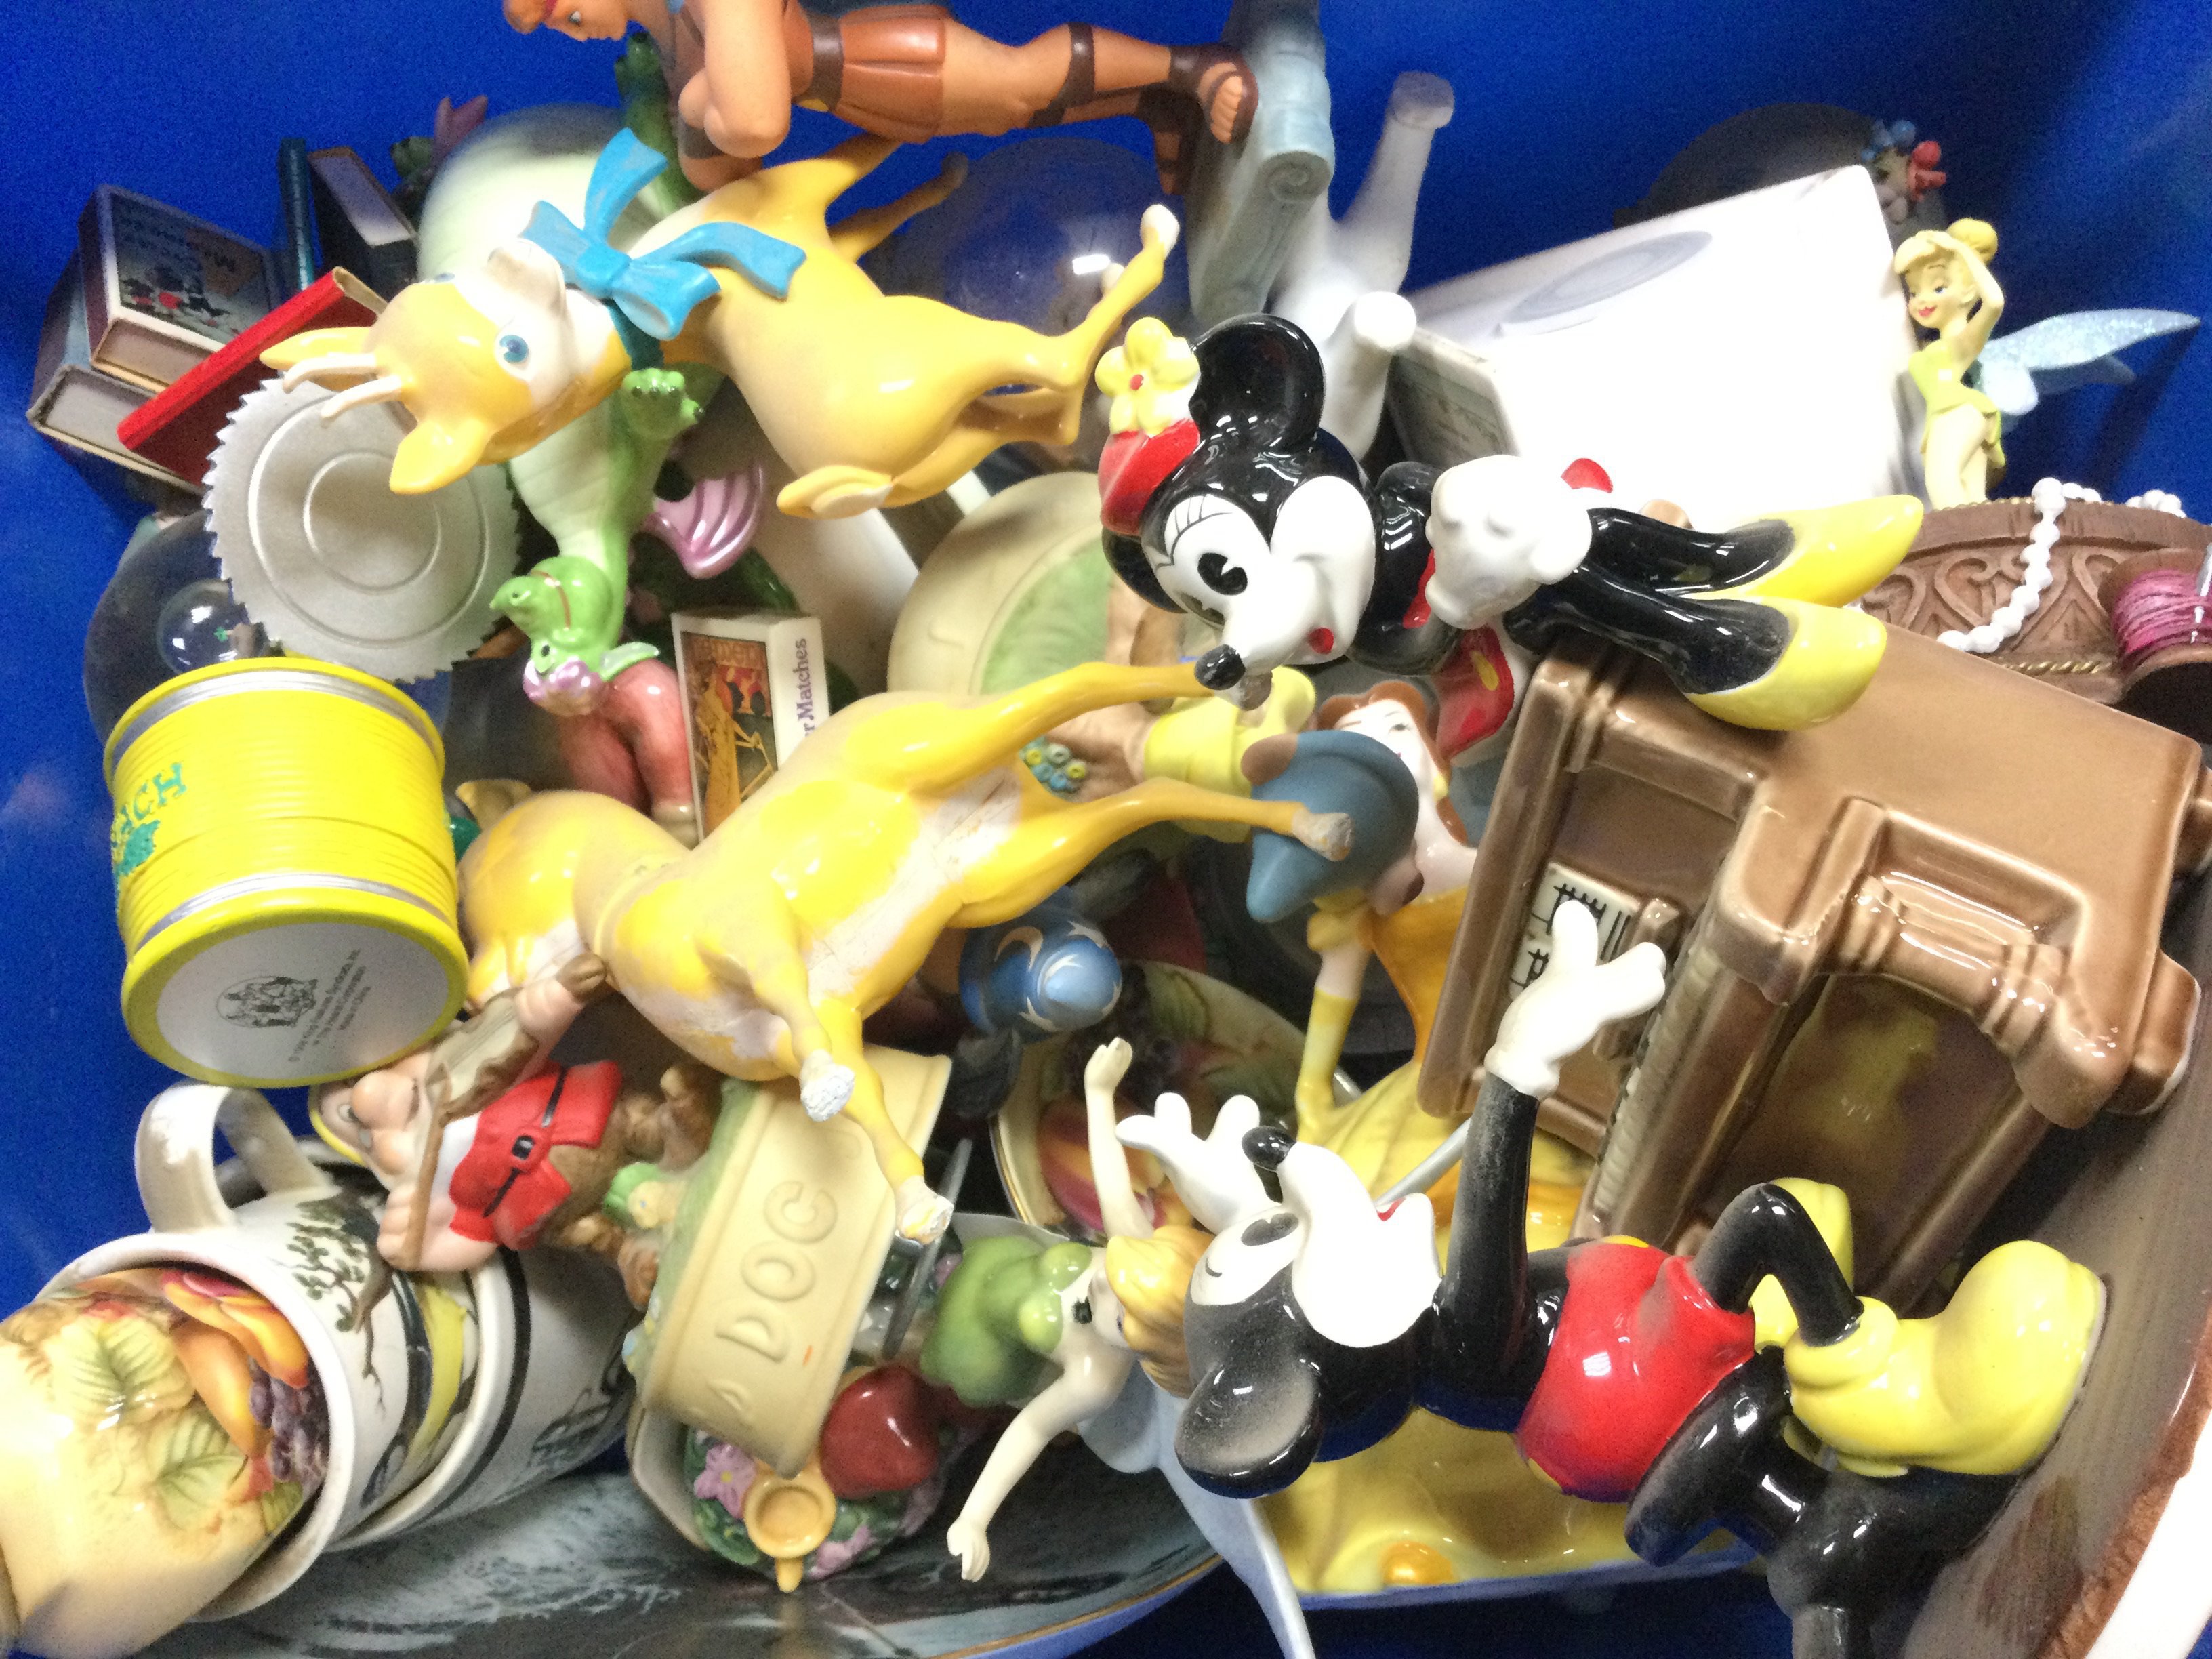 A Collection of Disney and Other Ceramics.